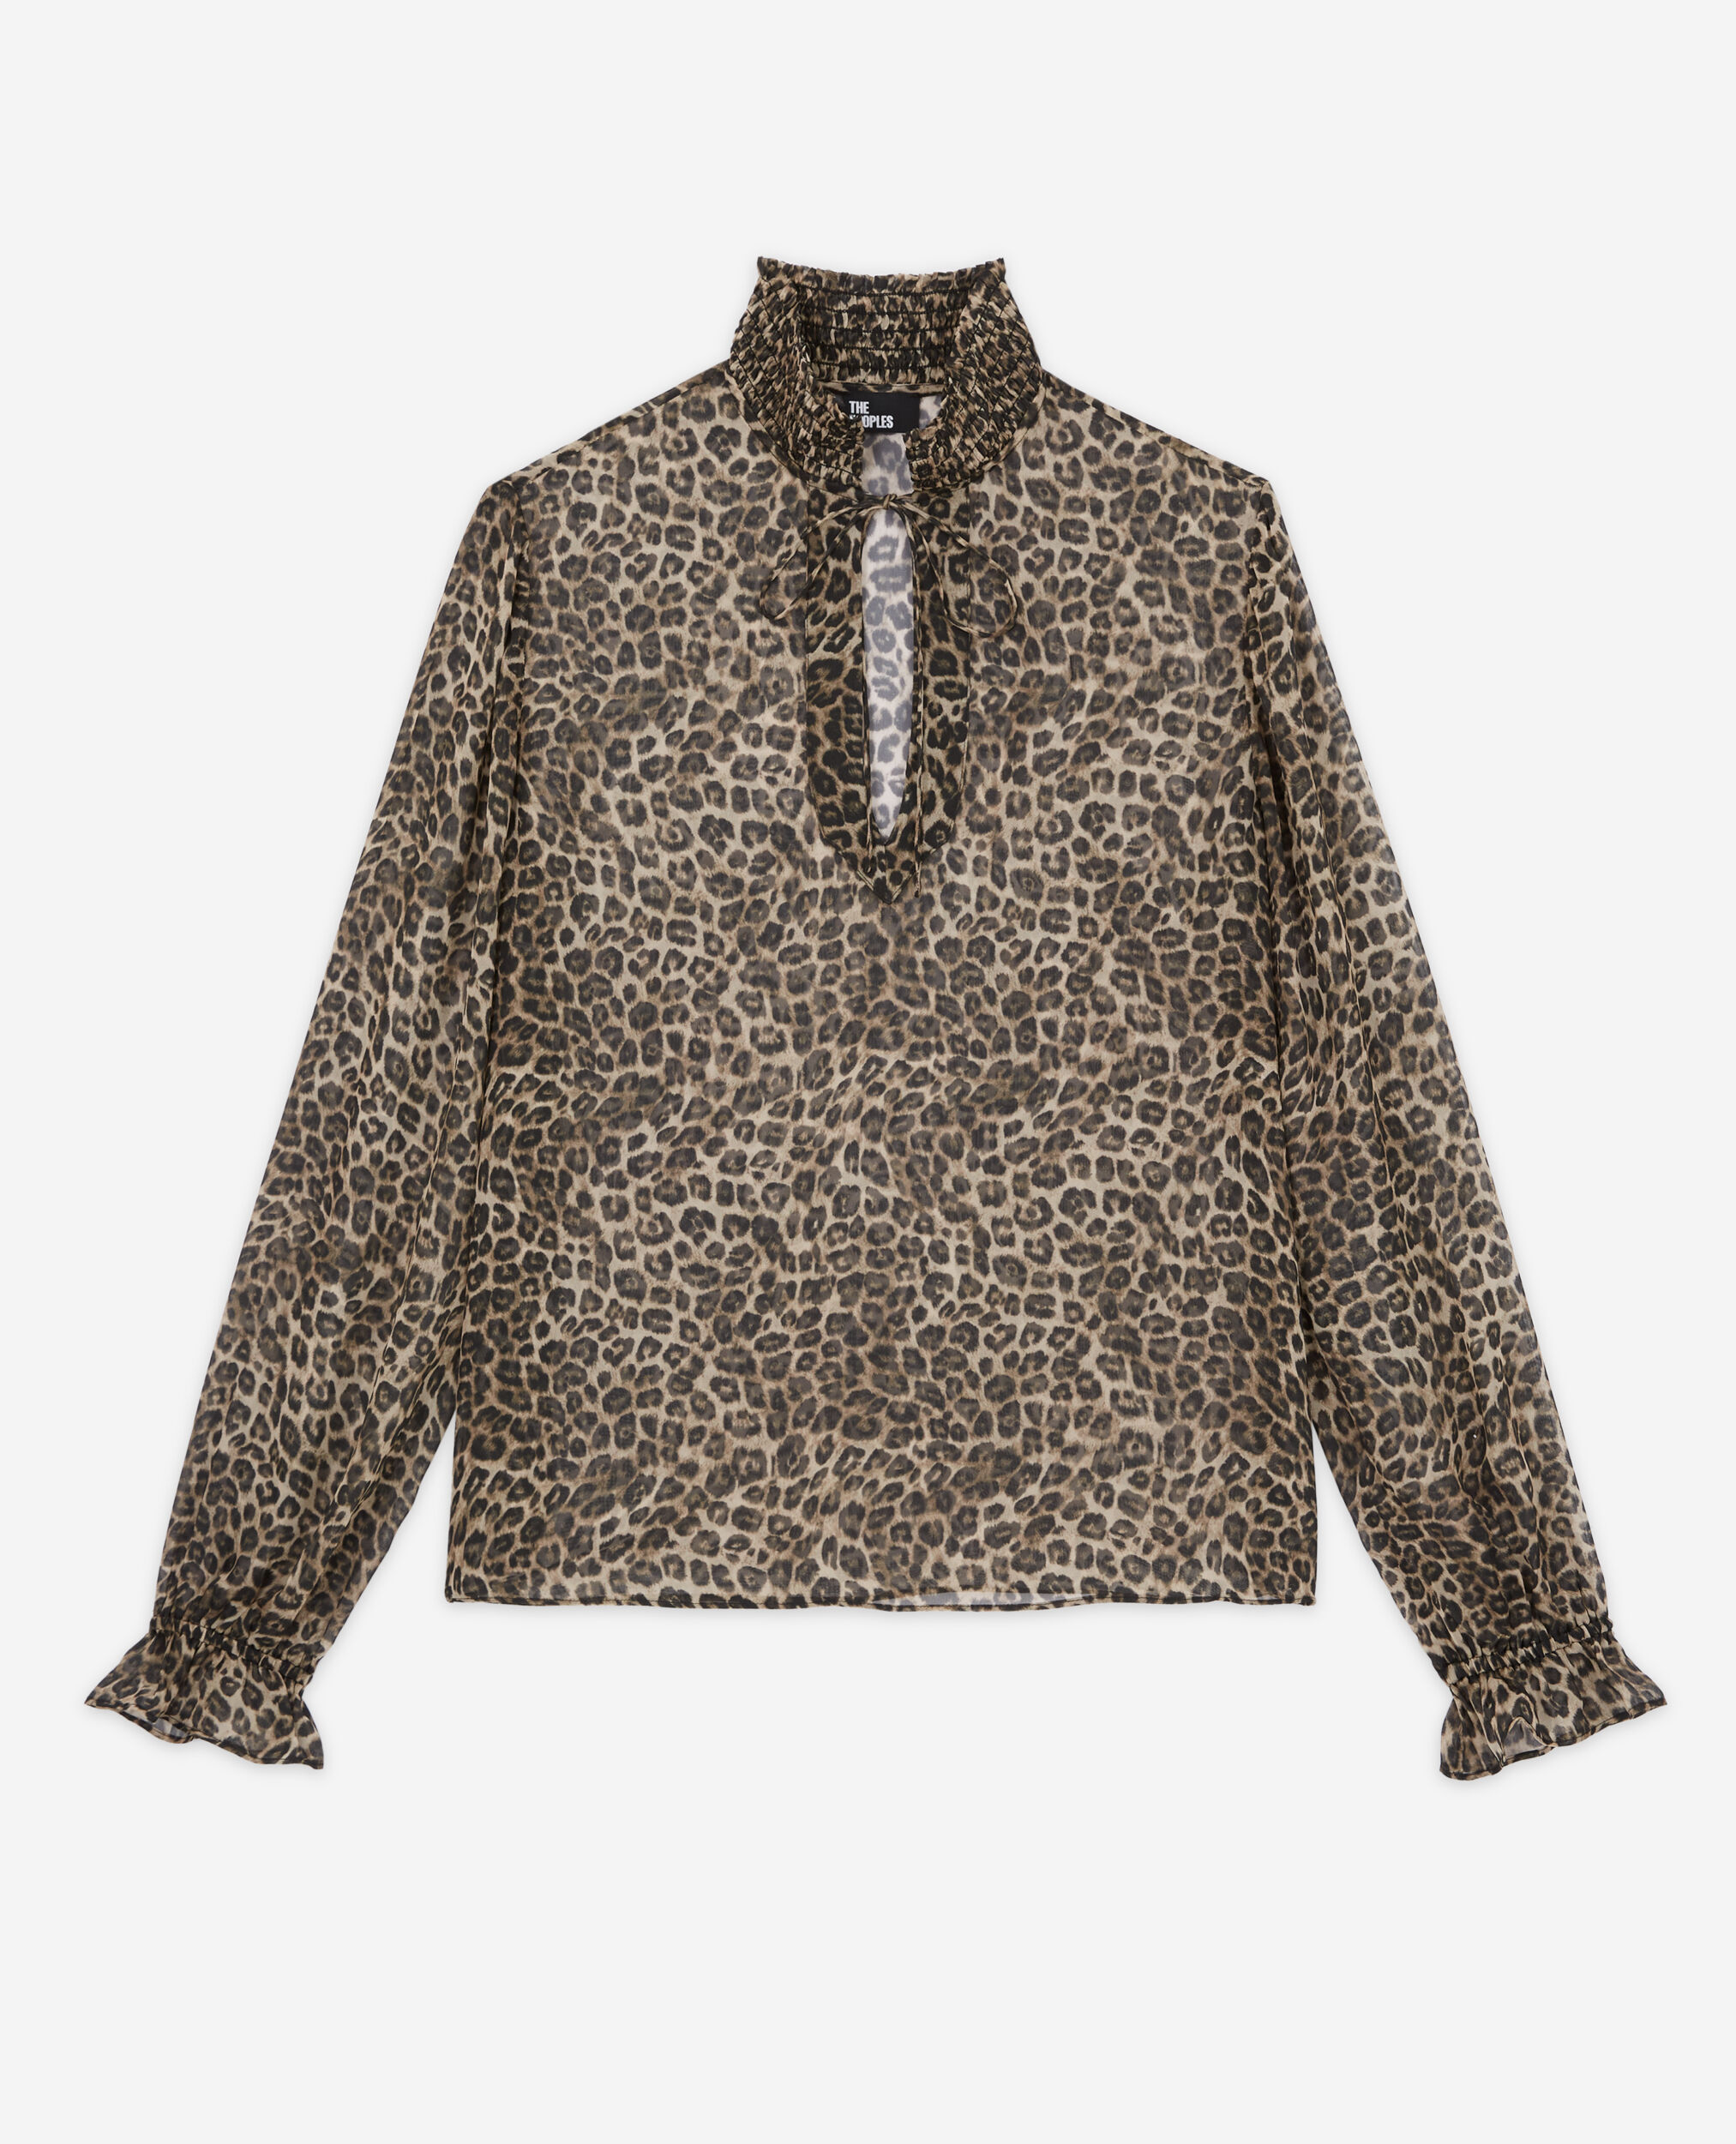 Bluse mit Leopardenmuster, LEOPARD, hi-res image number null